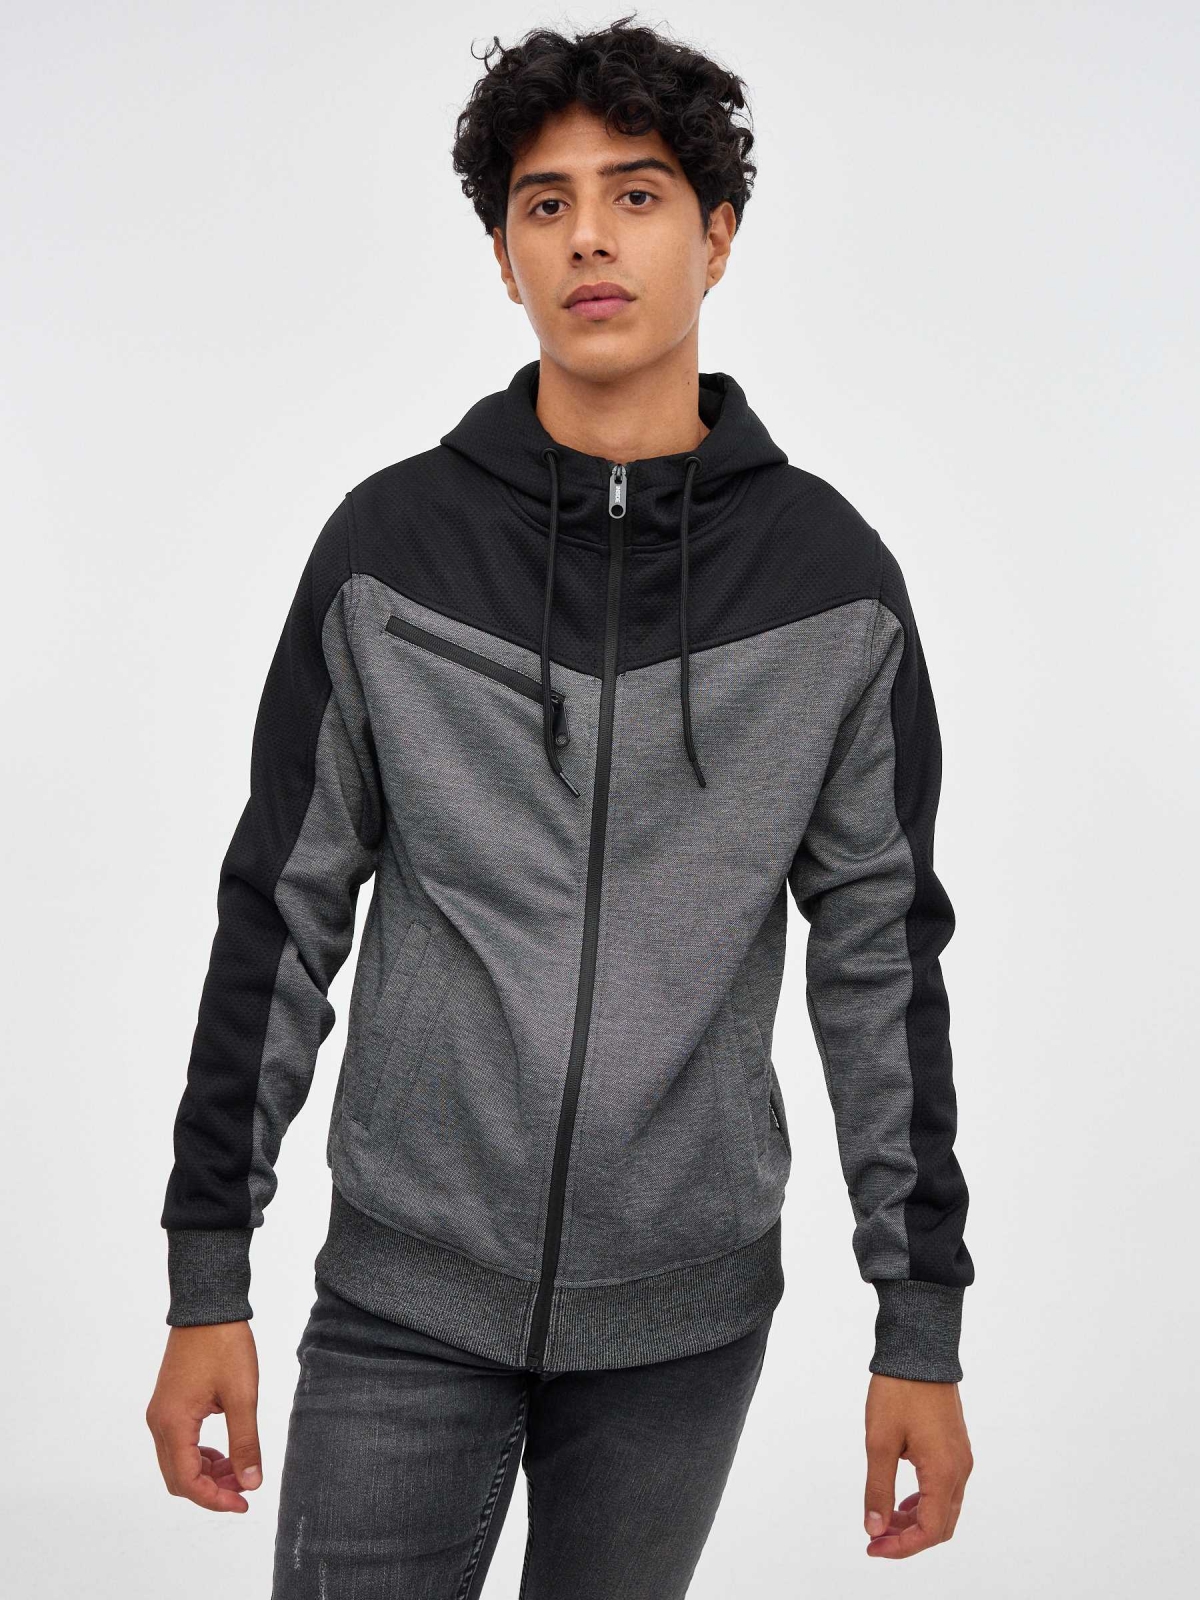 Open sweatshirt with zipper black middle front view